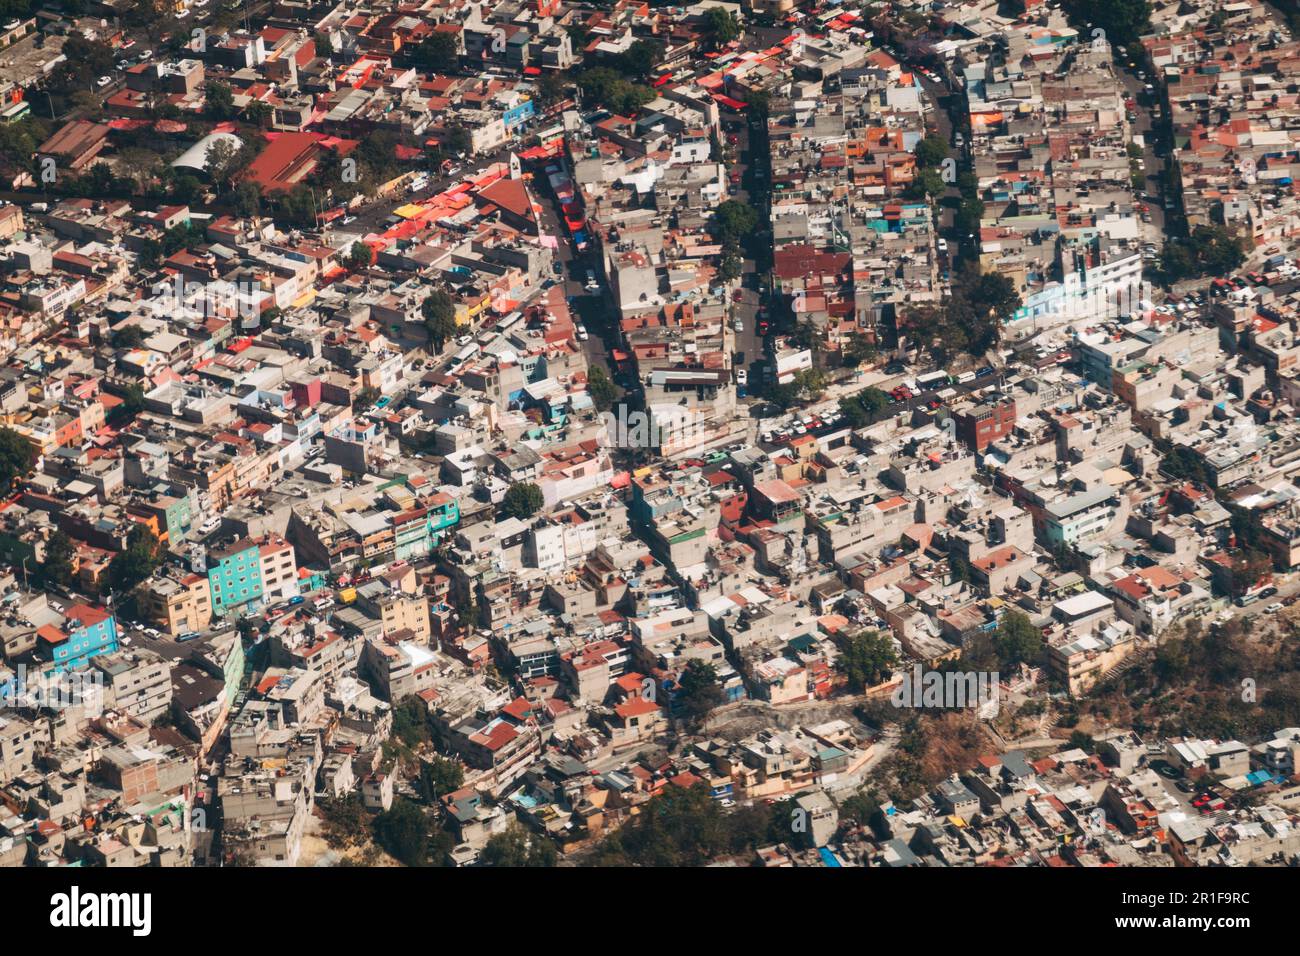 An aerial view of the colorful walls and roofs of houses in the outer suburbs of Mexico City Stock Photo